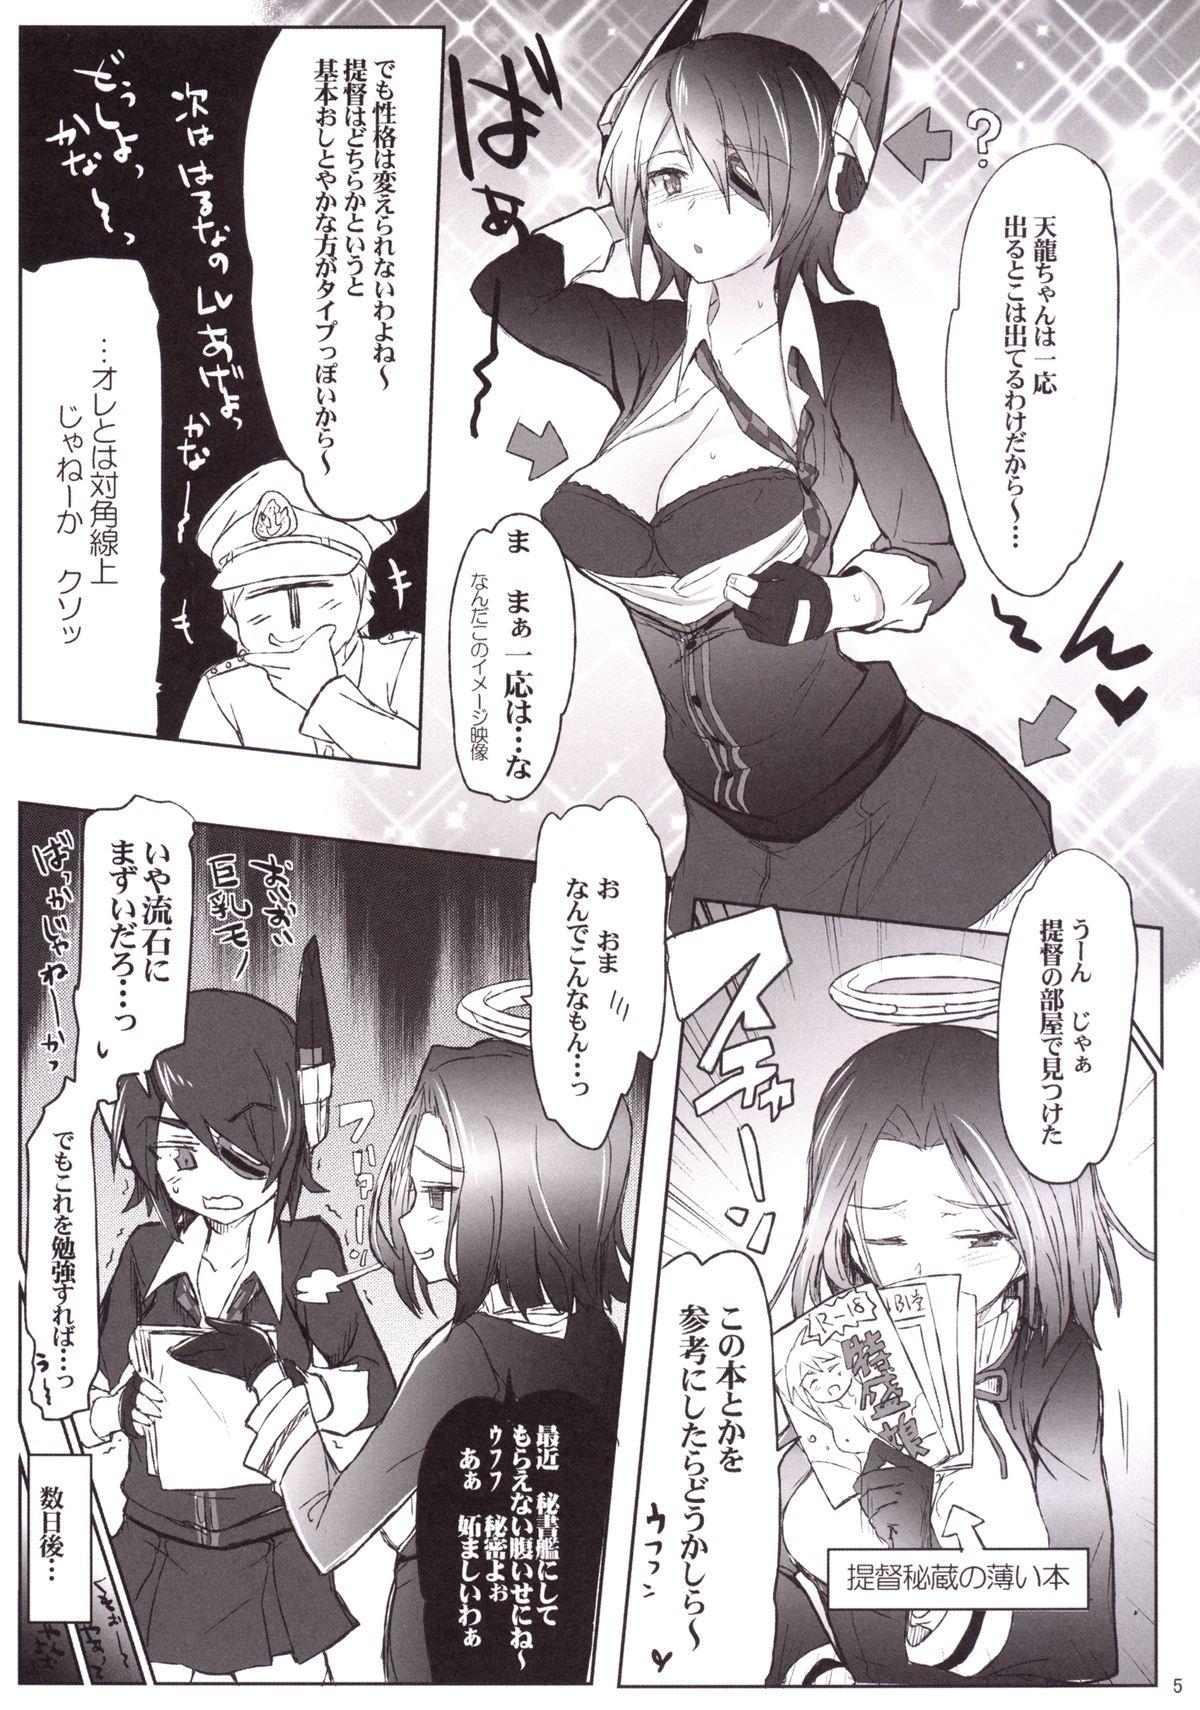 Groupsex Hisho Kan no Otsutome - Kantai collection Best Blowjobs - Page 4